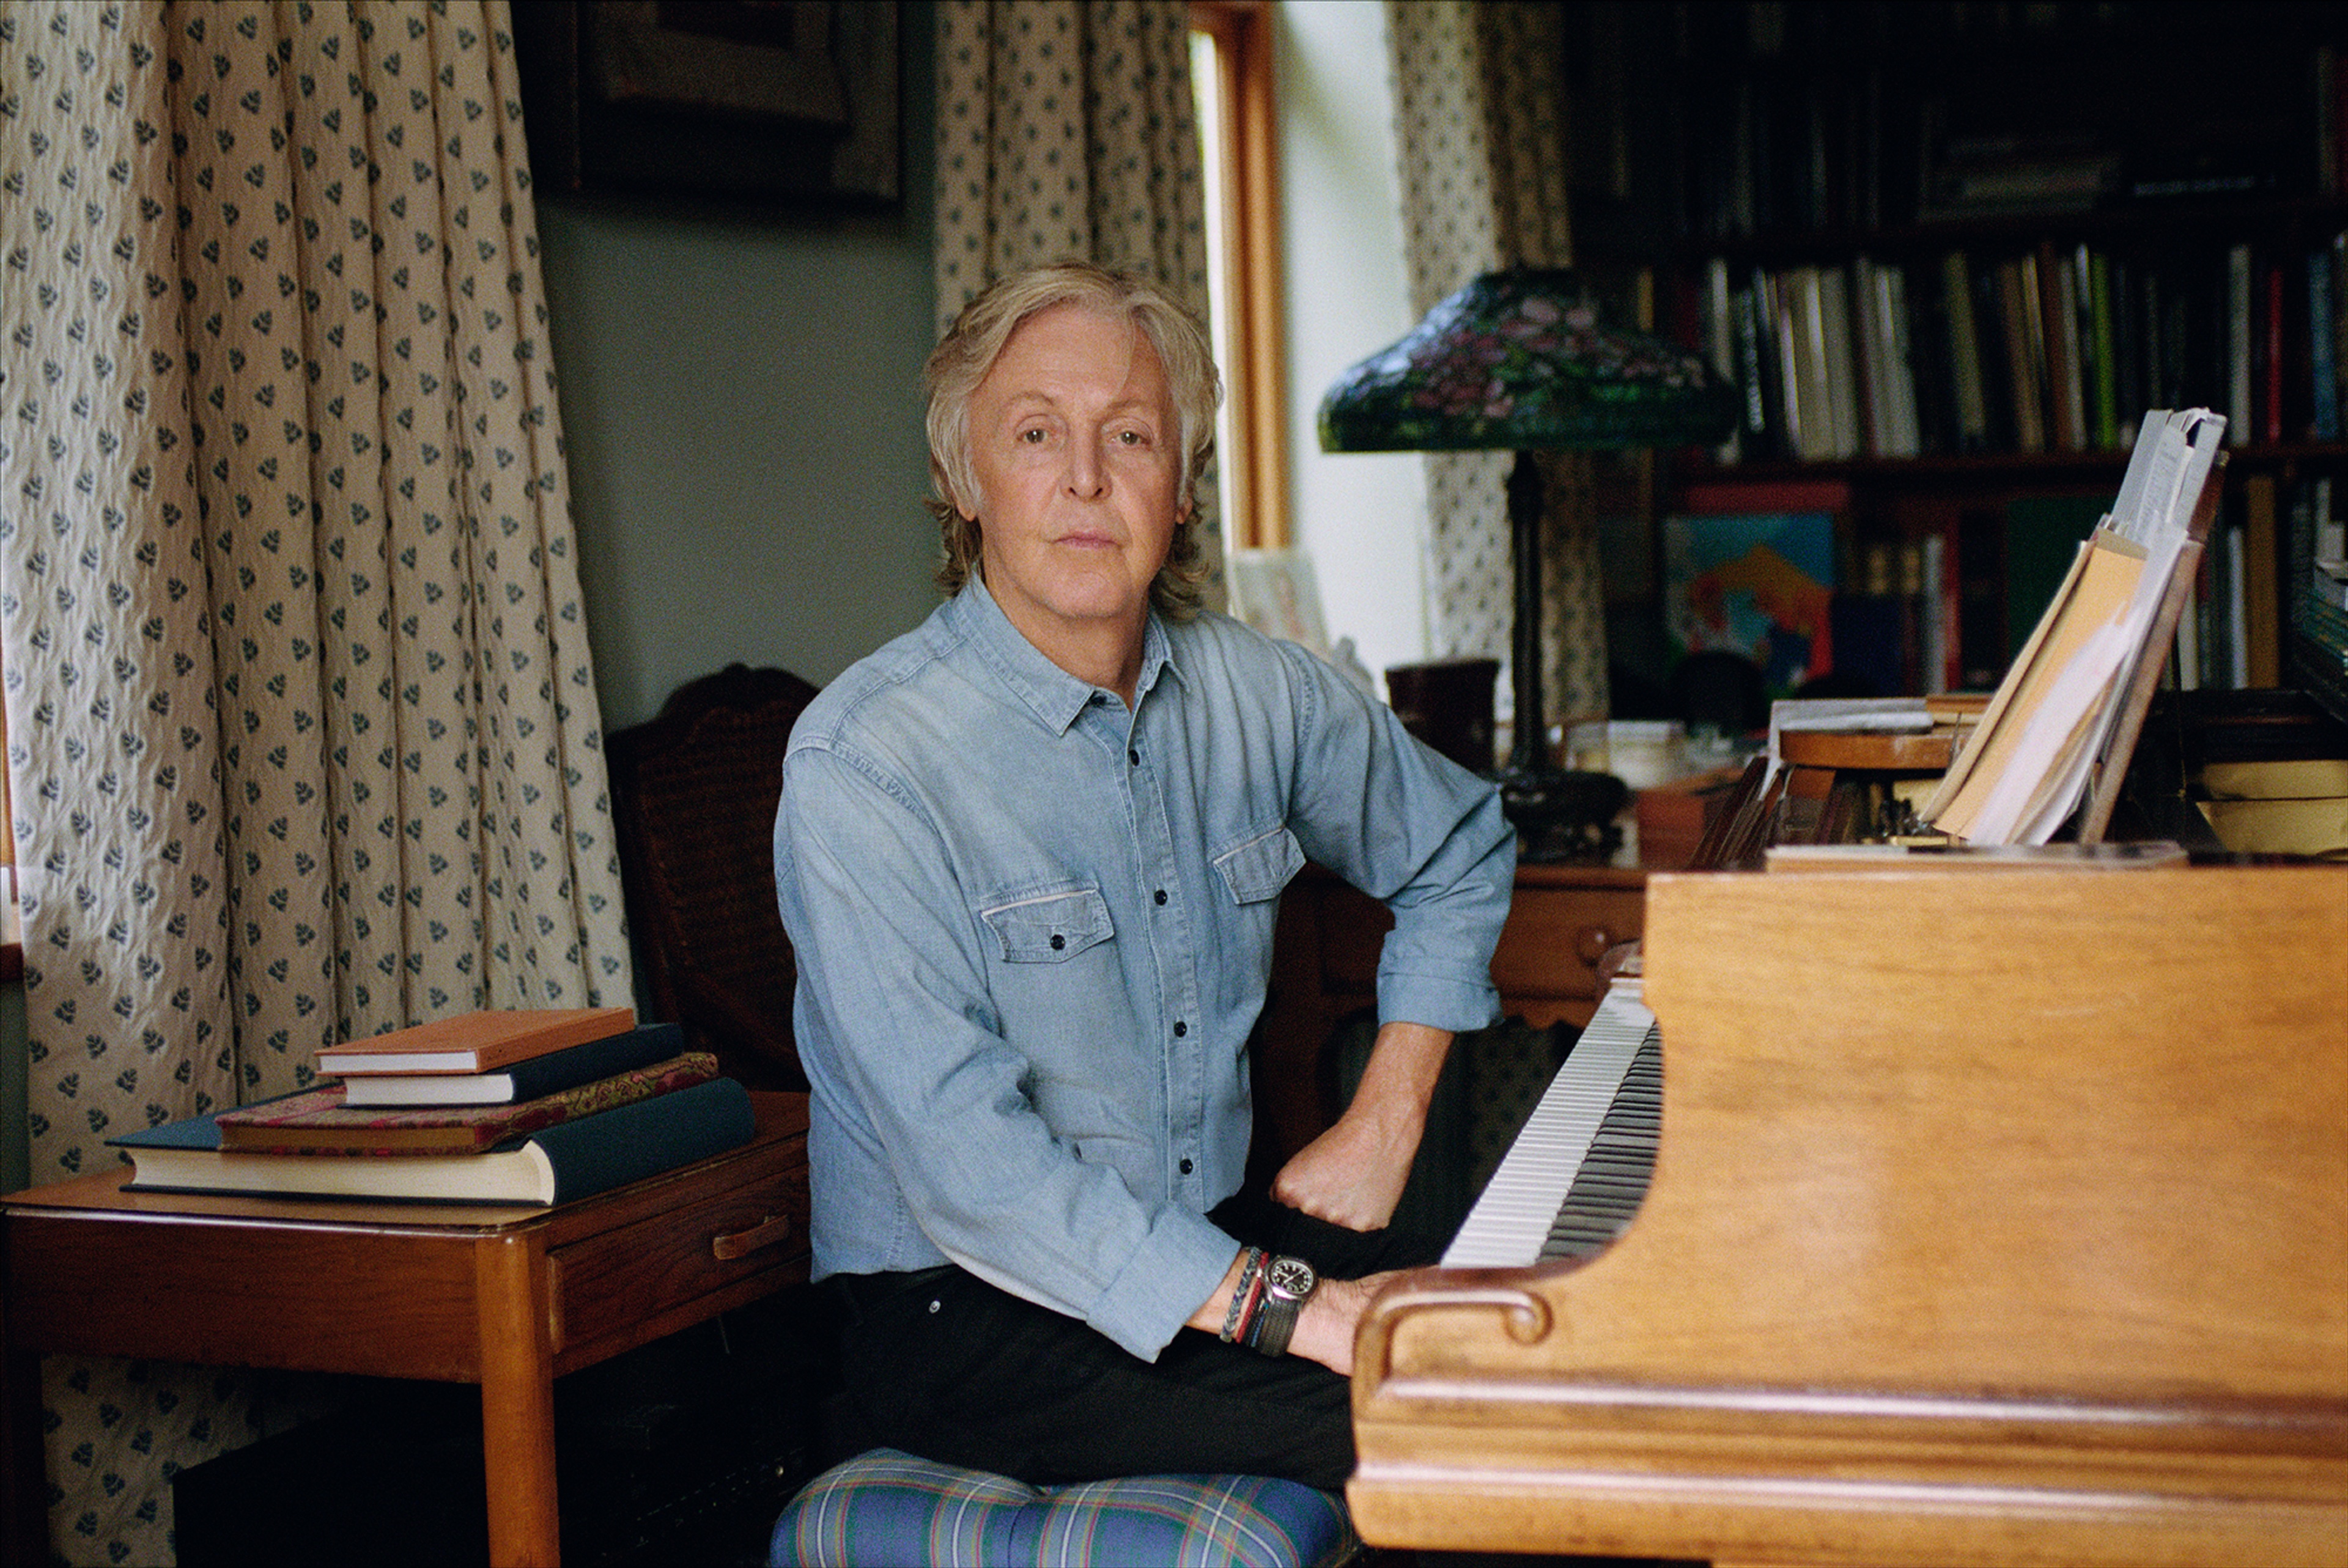 colour photo of Paul McCartney at home at a piano